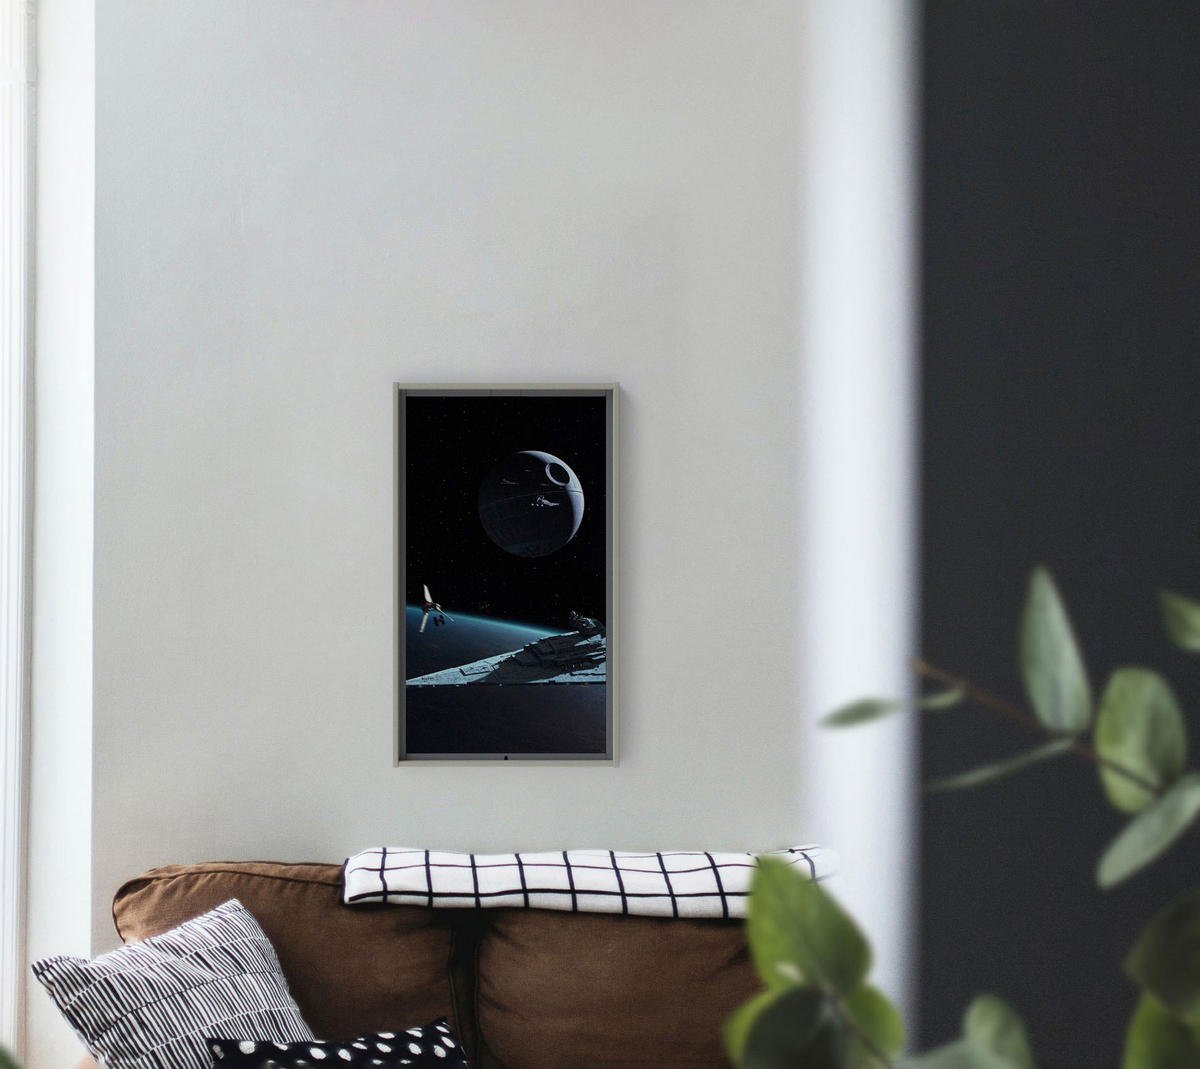 Wake Up To The View Of The Death Star With This Star Wars Themed Limited Edition 4k Smart Digital Display Luxurylaunches